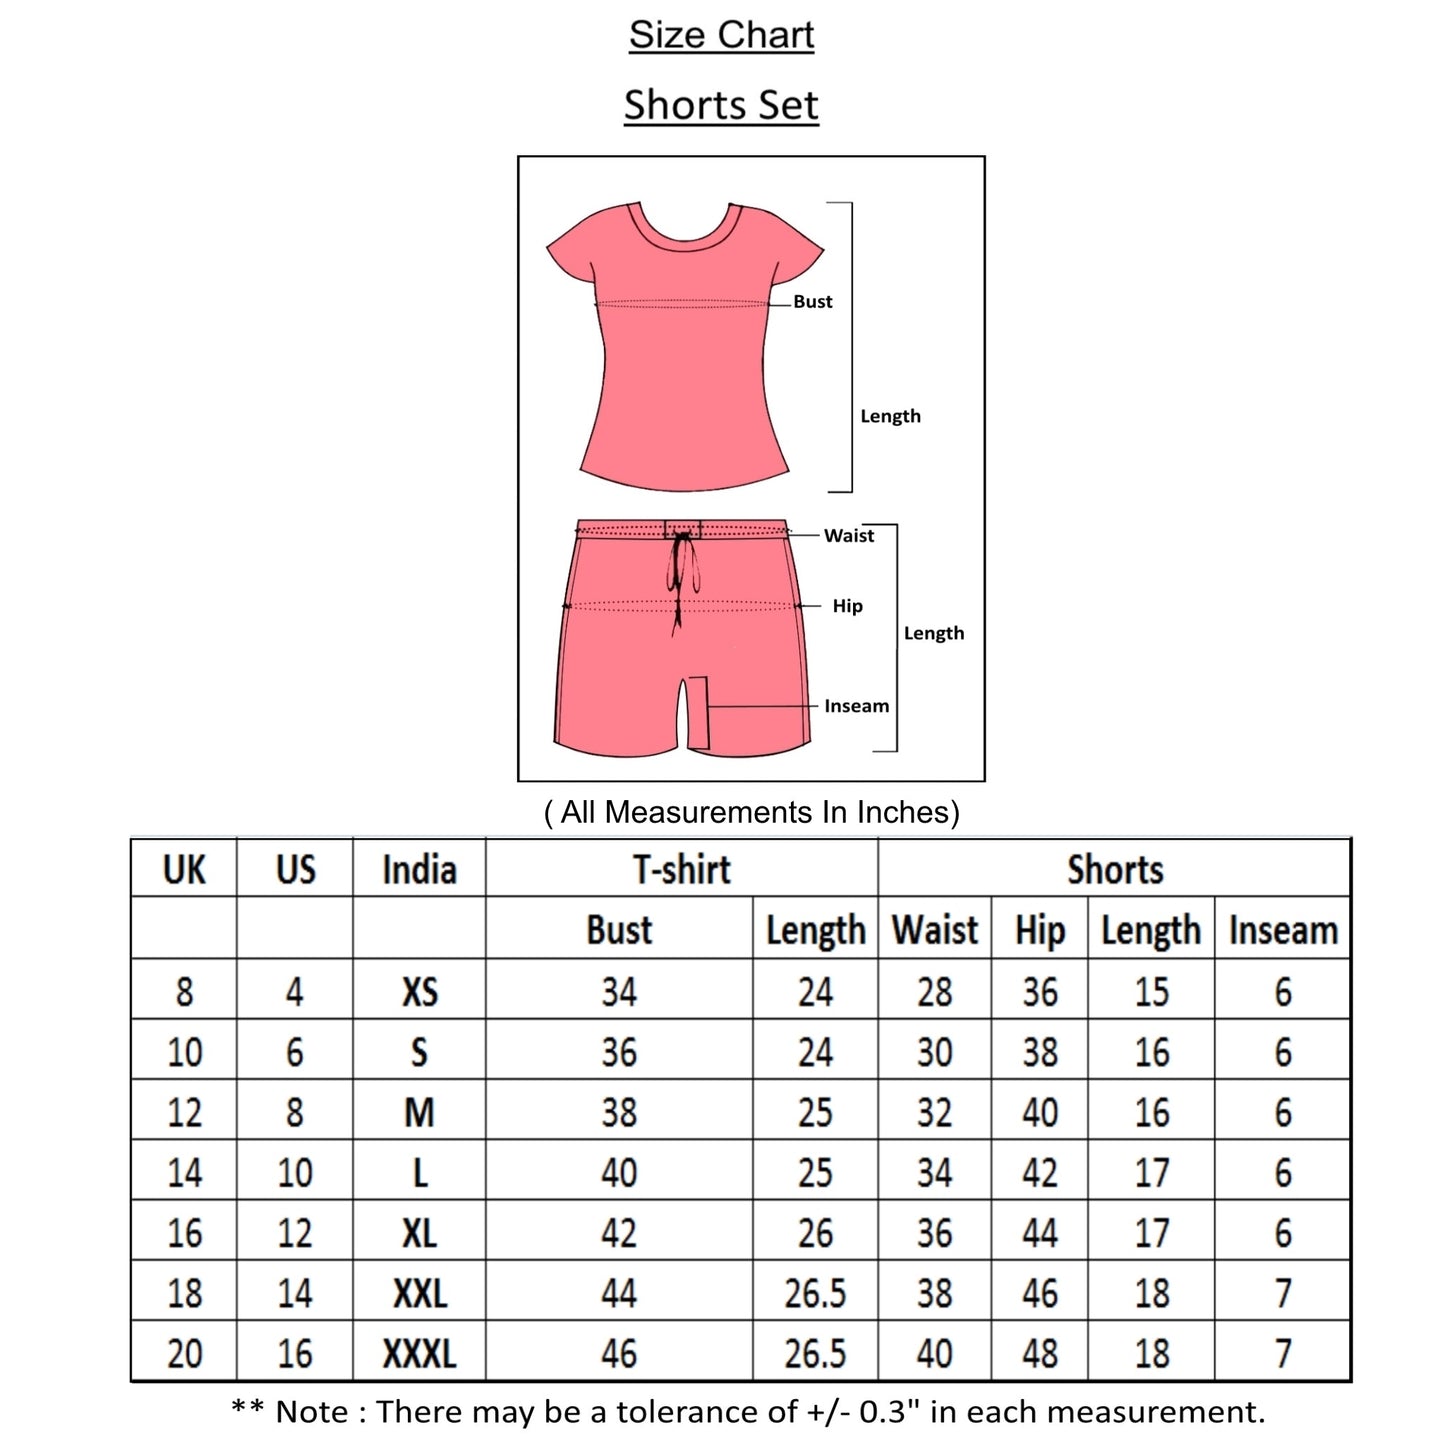 size chart of shorts set for all sizes